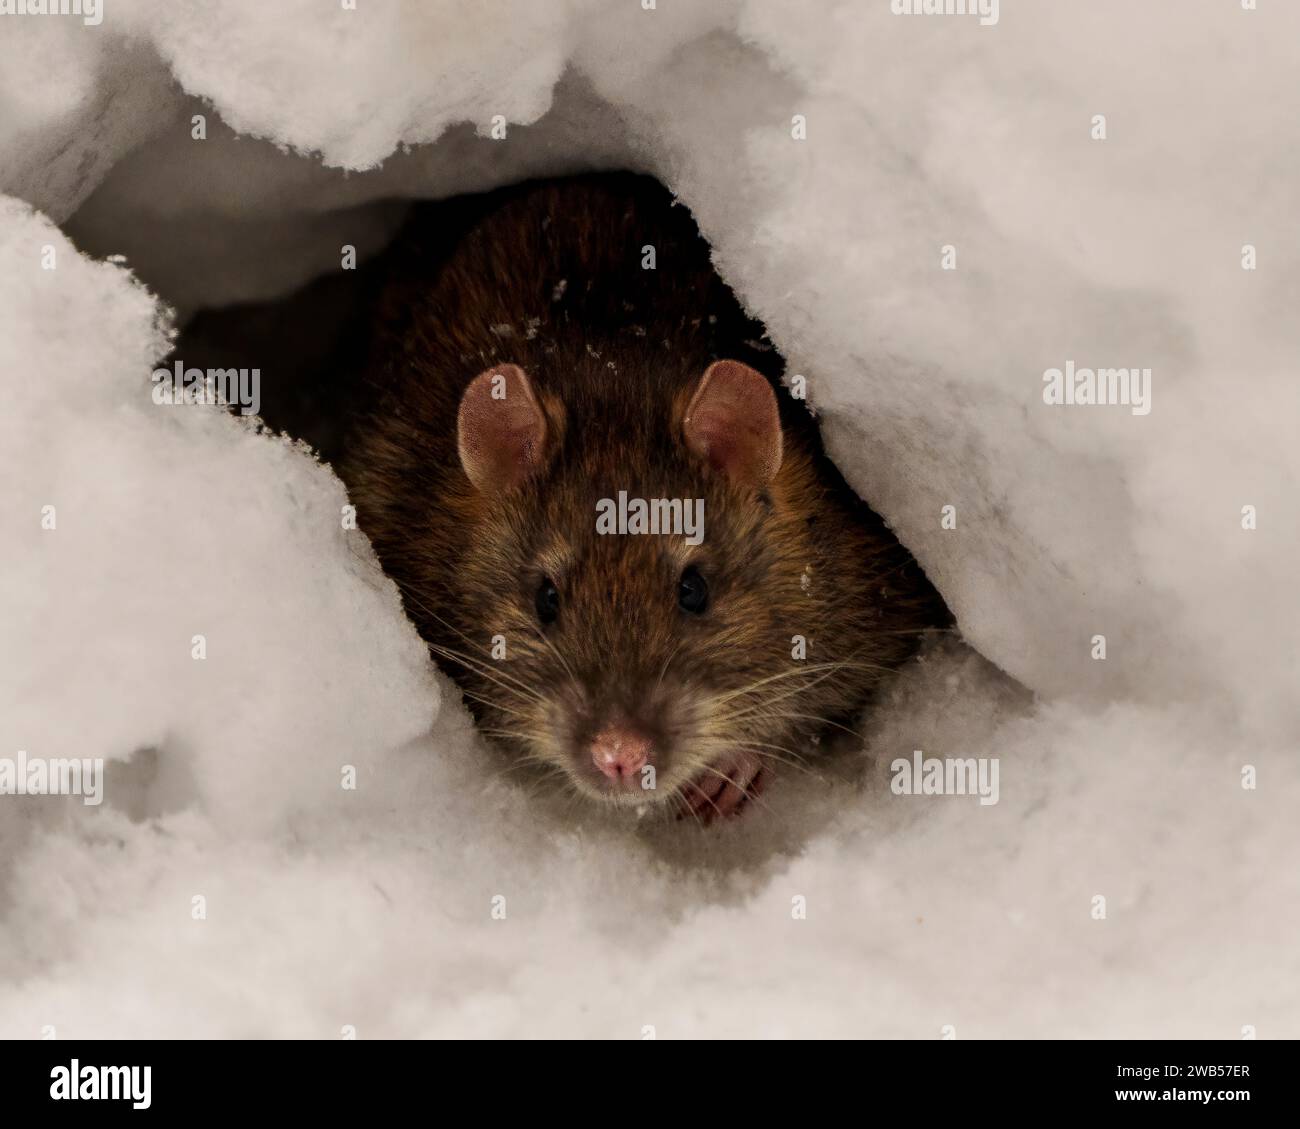 Rat head close-up front view in the opening of its burrow den in winter season foraging for food in its environment and habitat surrounding. Brown Rat Stock Photo